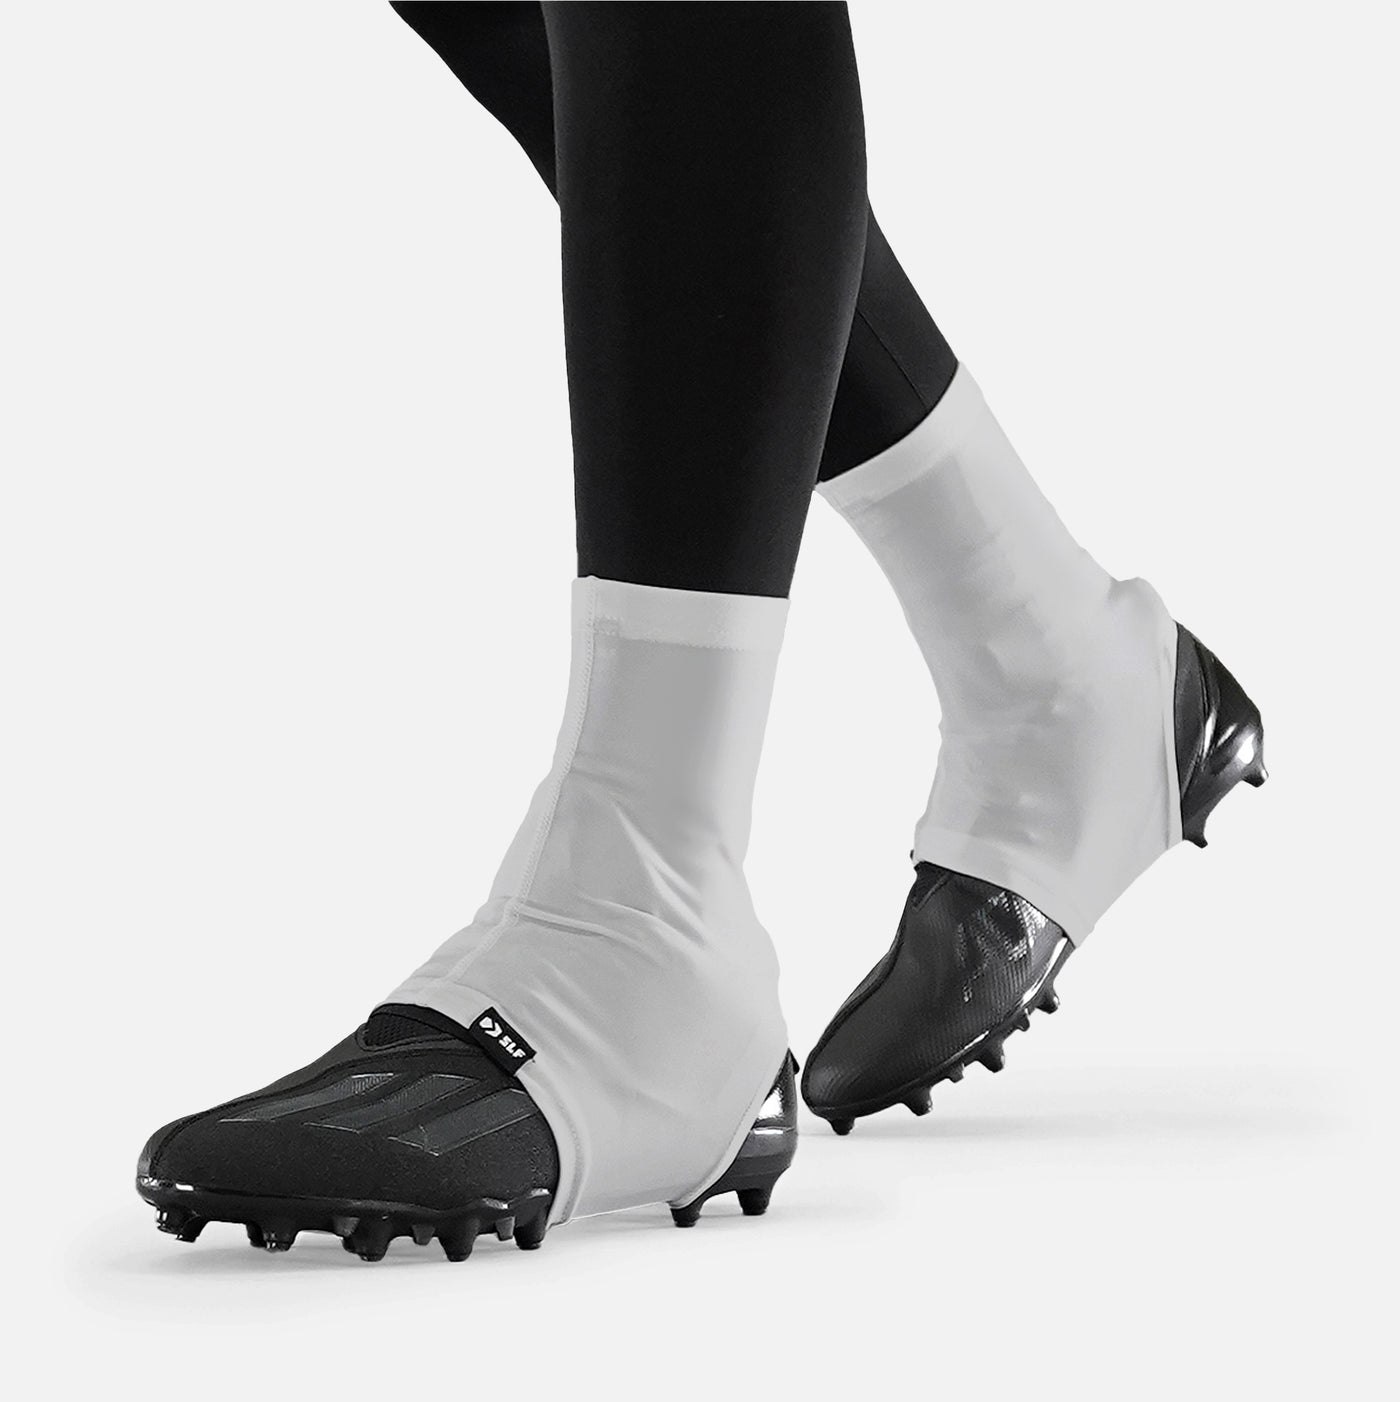 Hue Light Gray Spats / Cleat Covers - Big